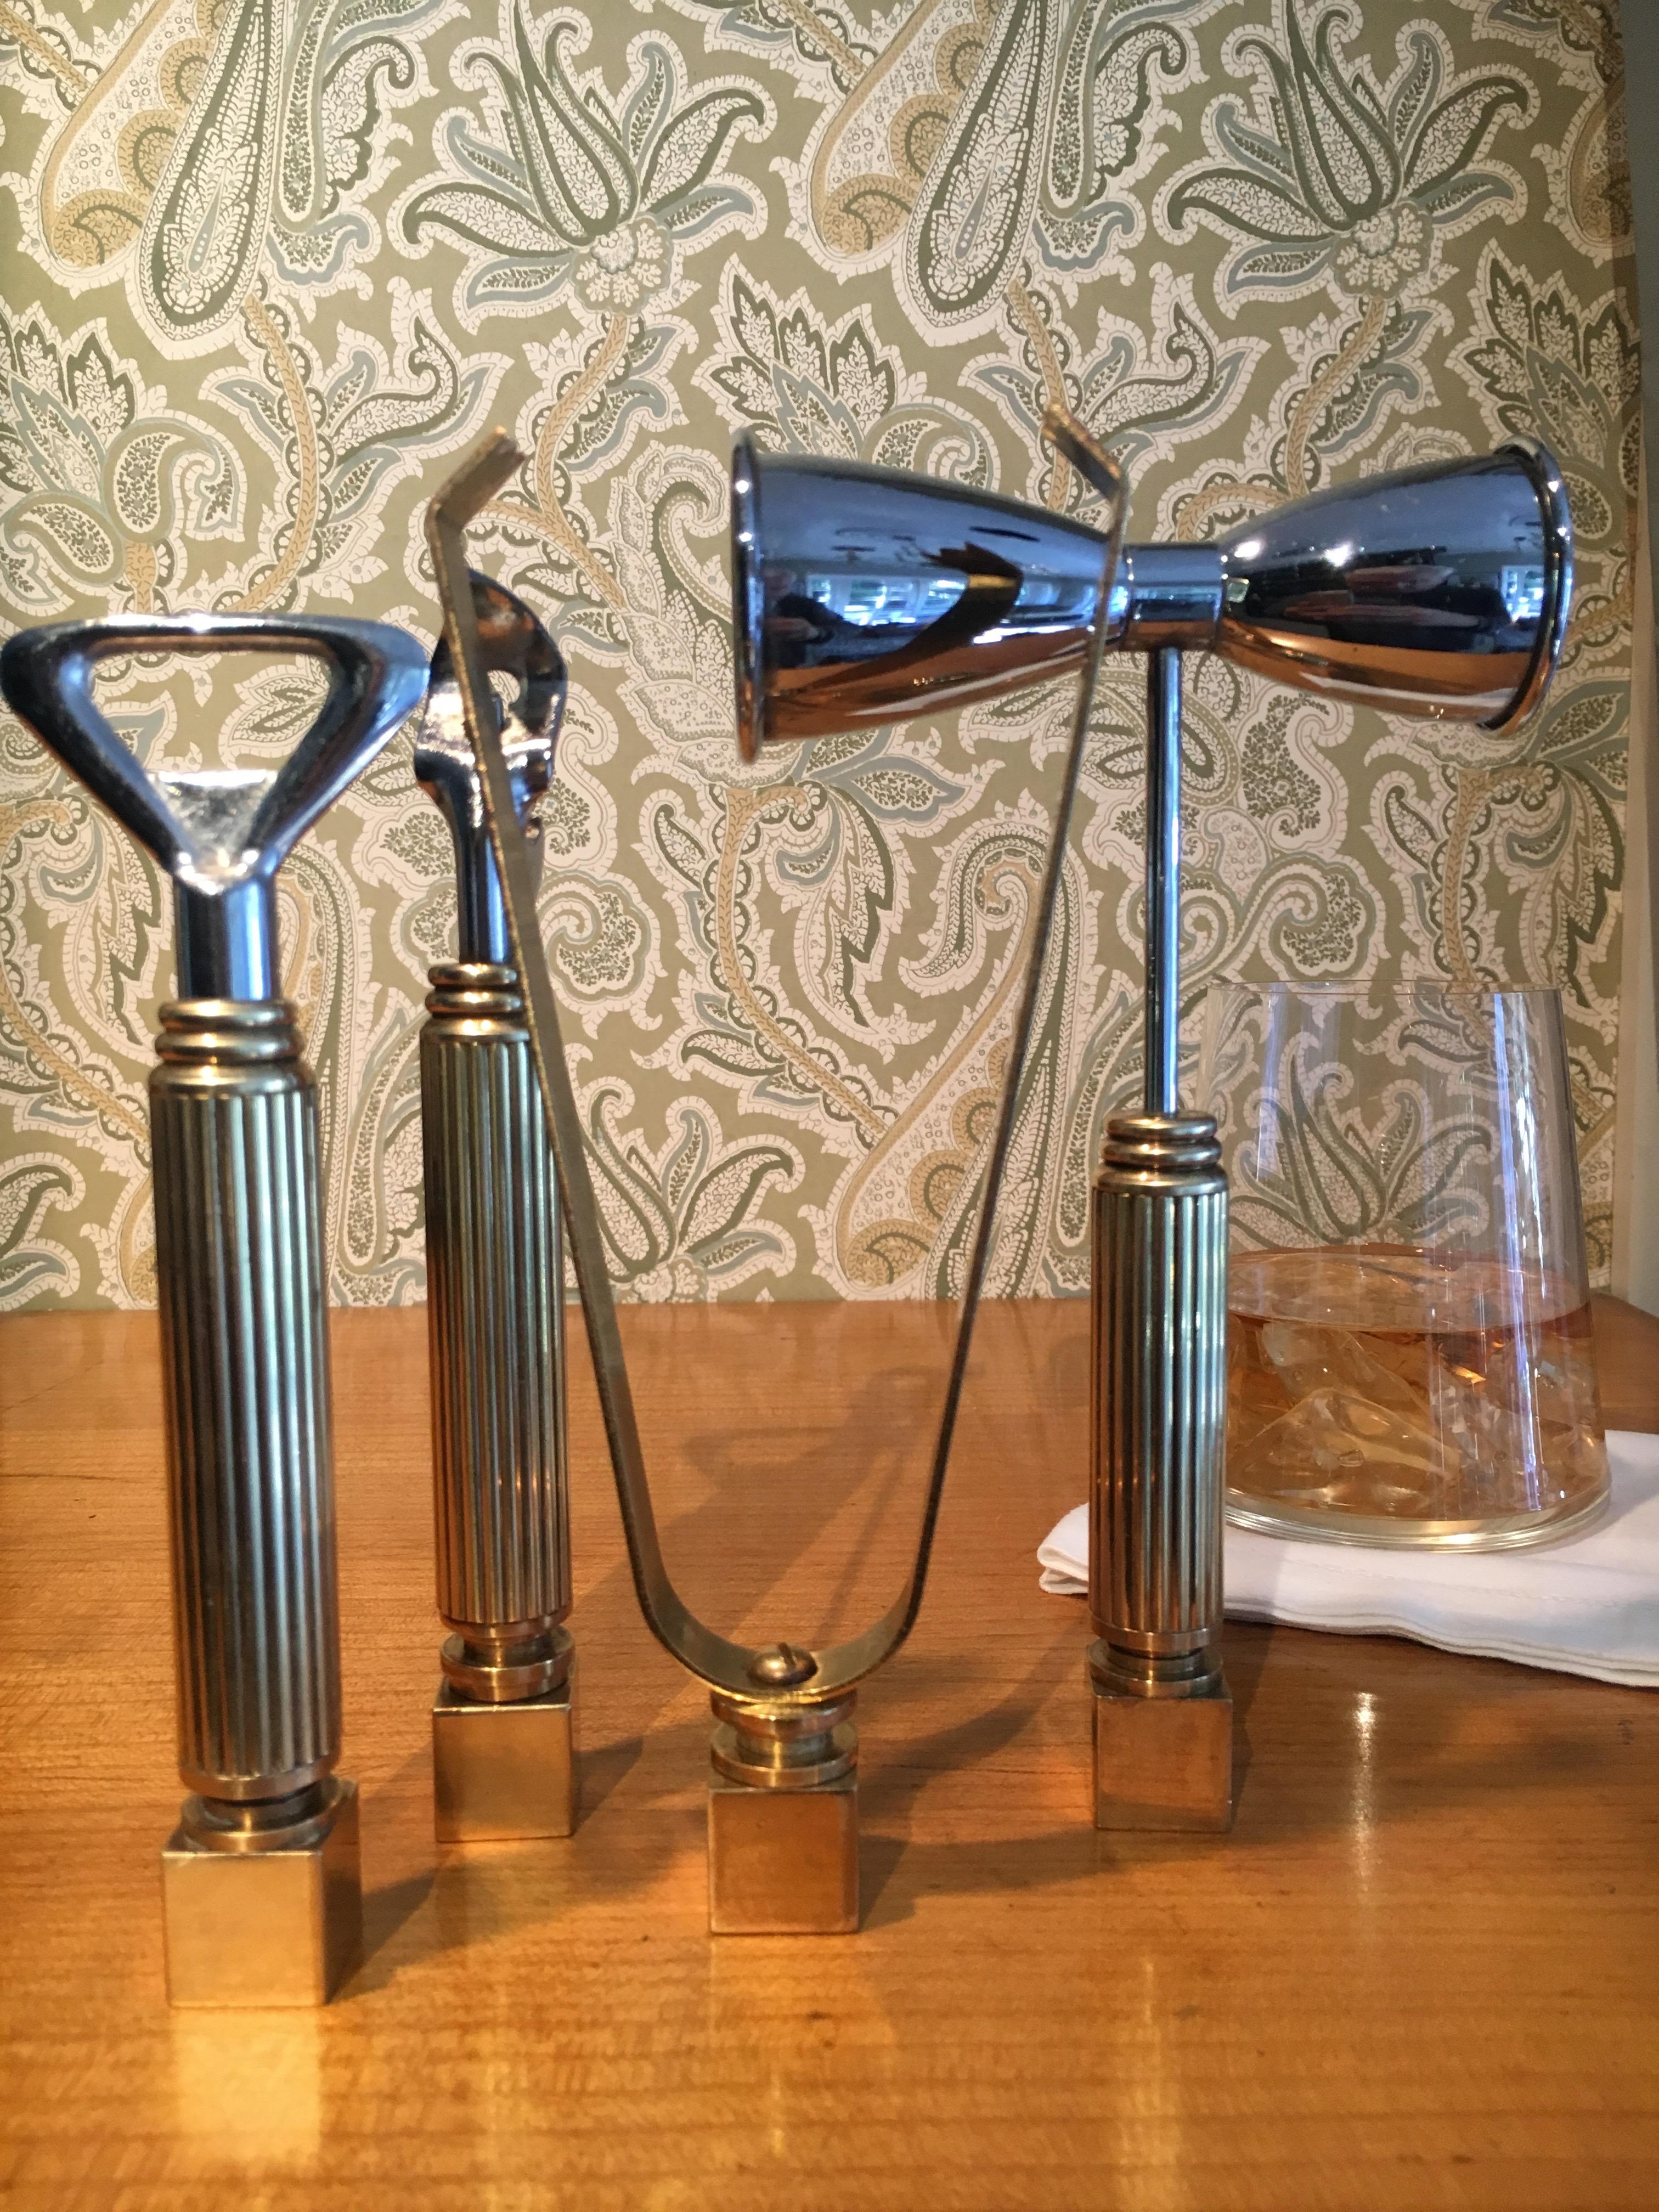 Set of four brass bar accessories, a substantial and heavy solid brass set. Can opener, bottle opener, double (two sizes) Jigger, ice tongs. Beautifully designed and weighted with brass block allowing all to stand in place!
 